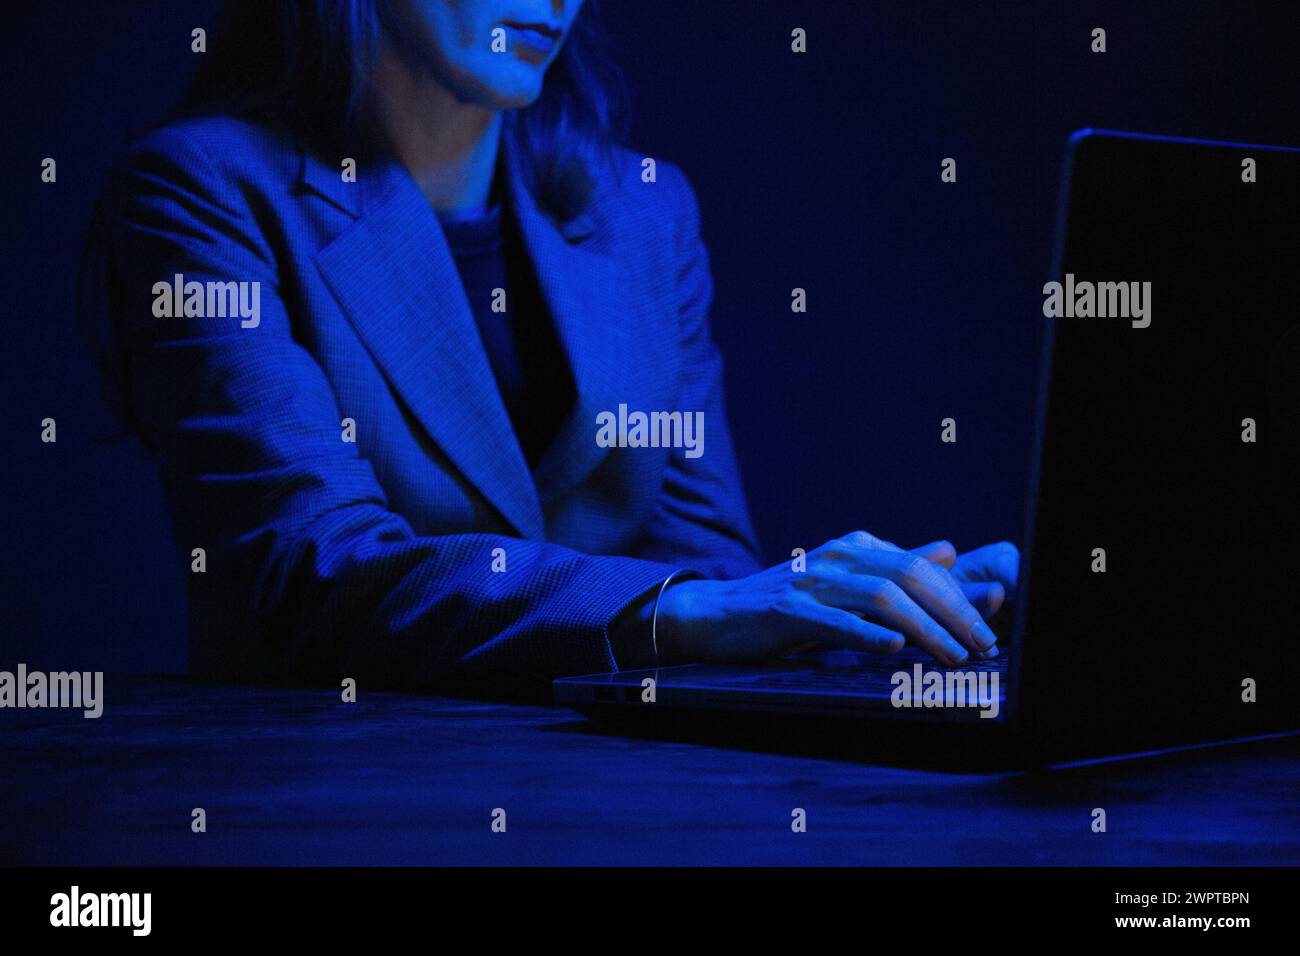 Business woman working on a laptop in the dark and illuminated by the screen. No face. Focus on hands. Blue color correction. Stock Photo